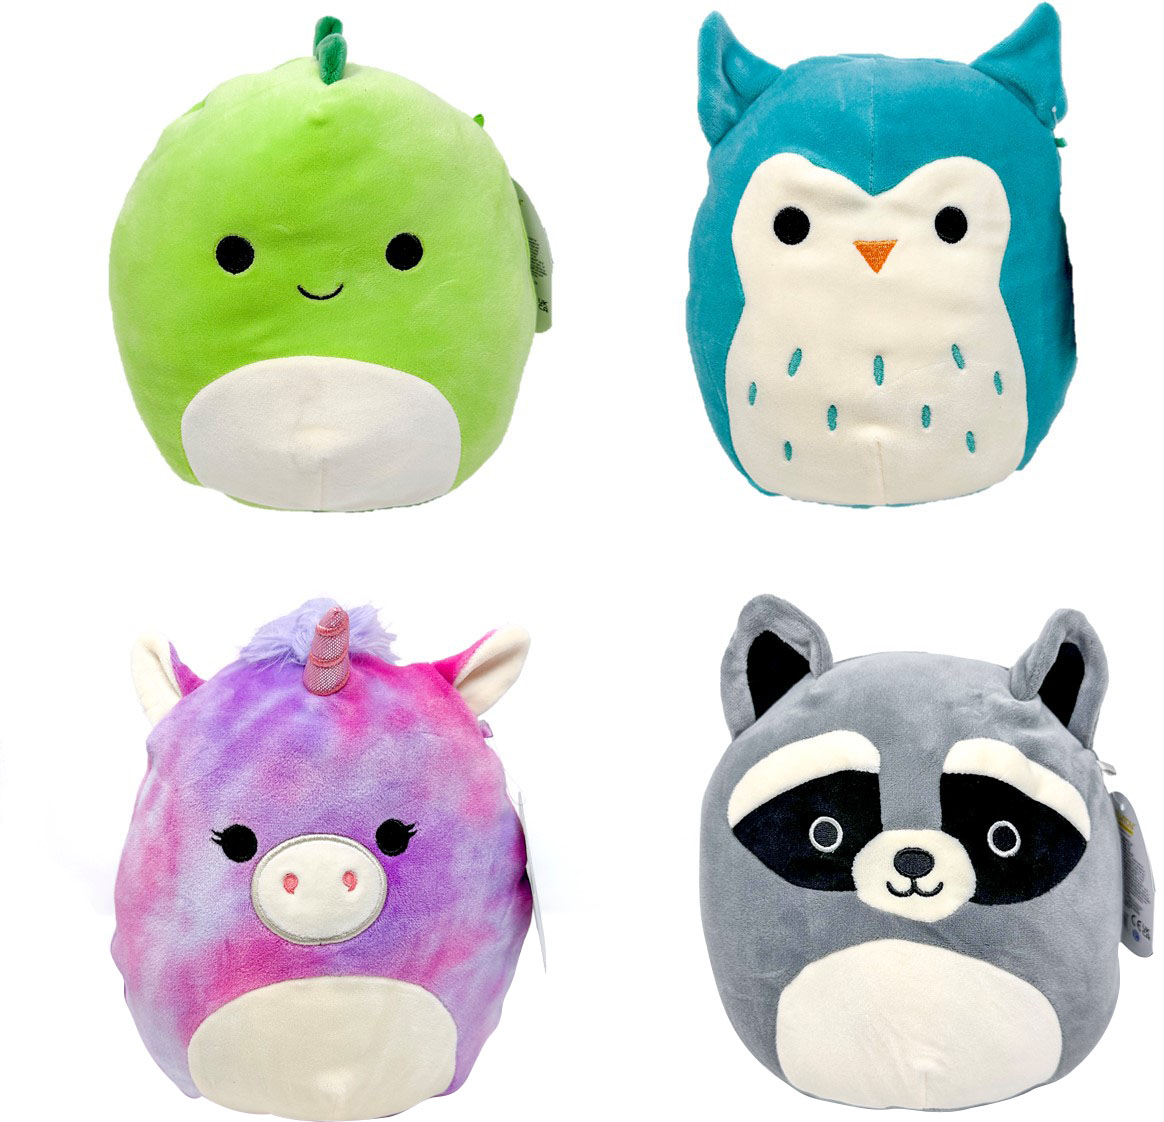 Squishmallows Are Taking Over - The New York Times